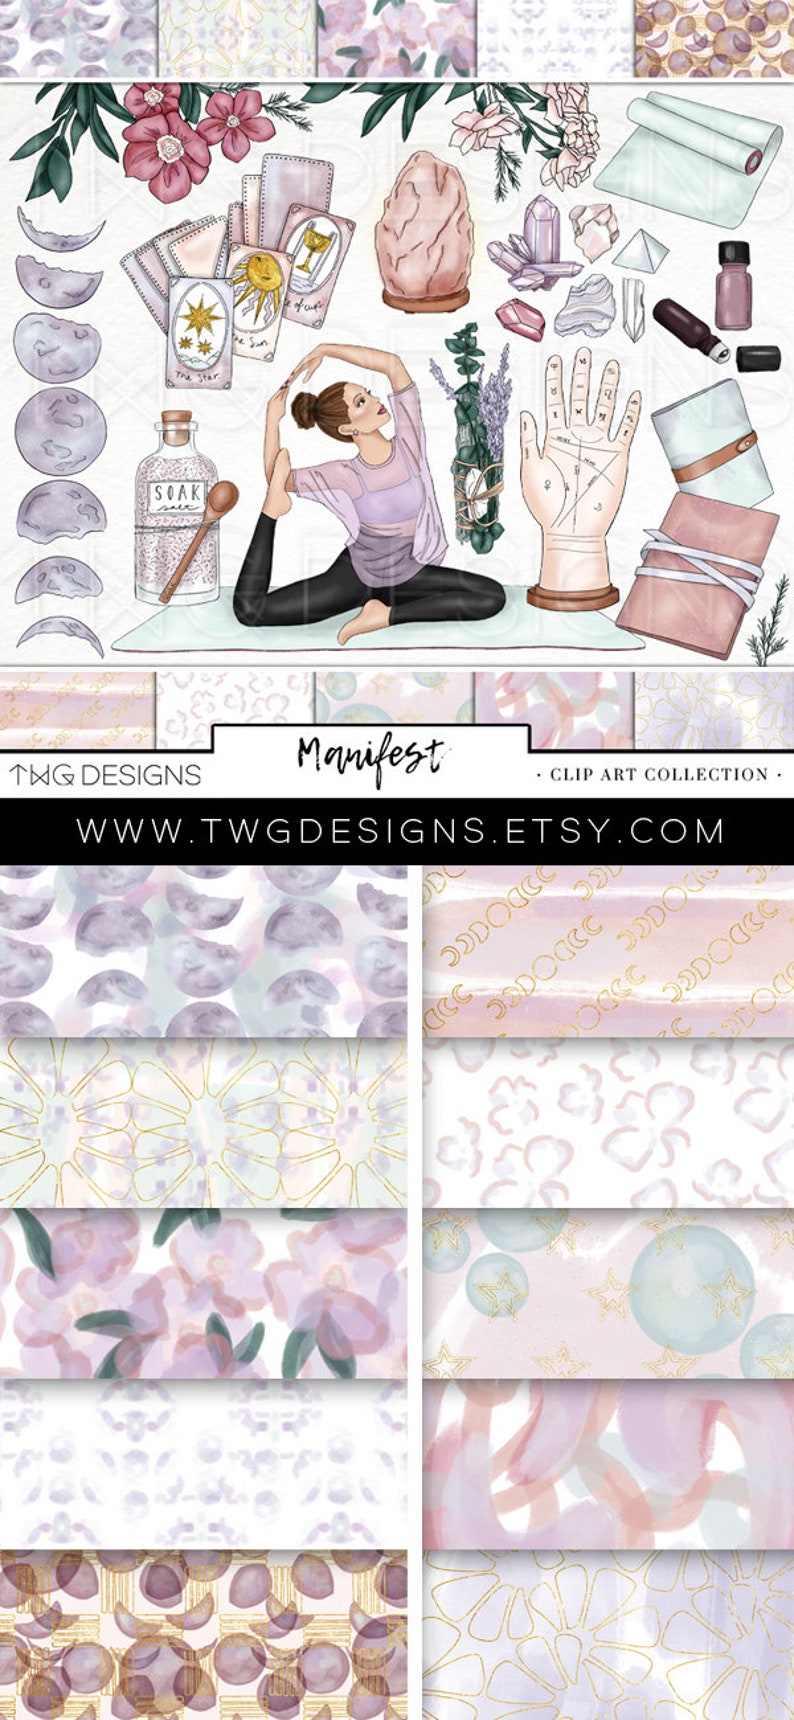 Manifestation Fashion Girl Clip Art Watercolor Clipart Crystals Moon Palmistry Tarot Cards Sage Journal Yoga Hand Drawn Sticker Graphics image 5